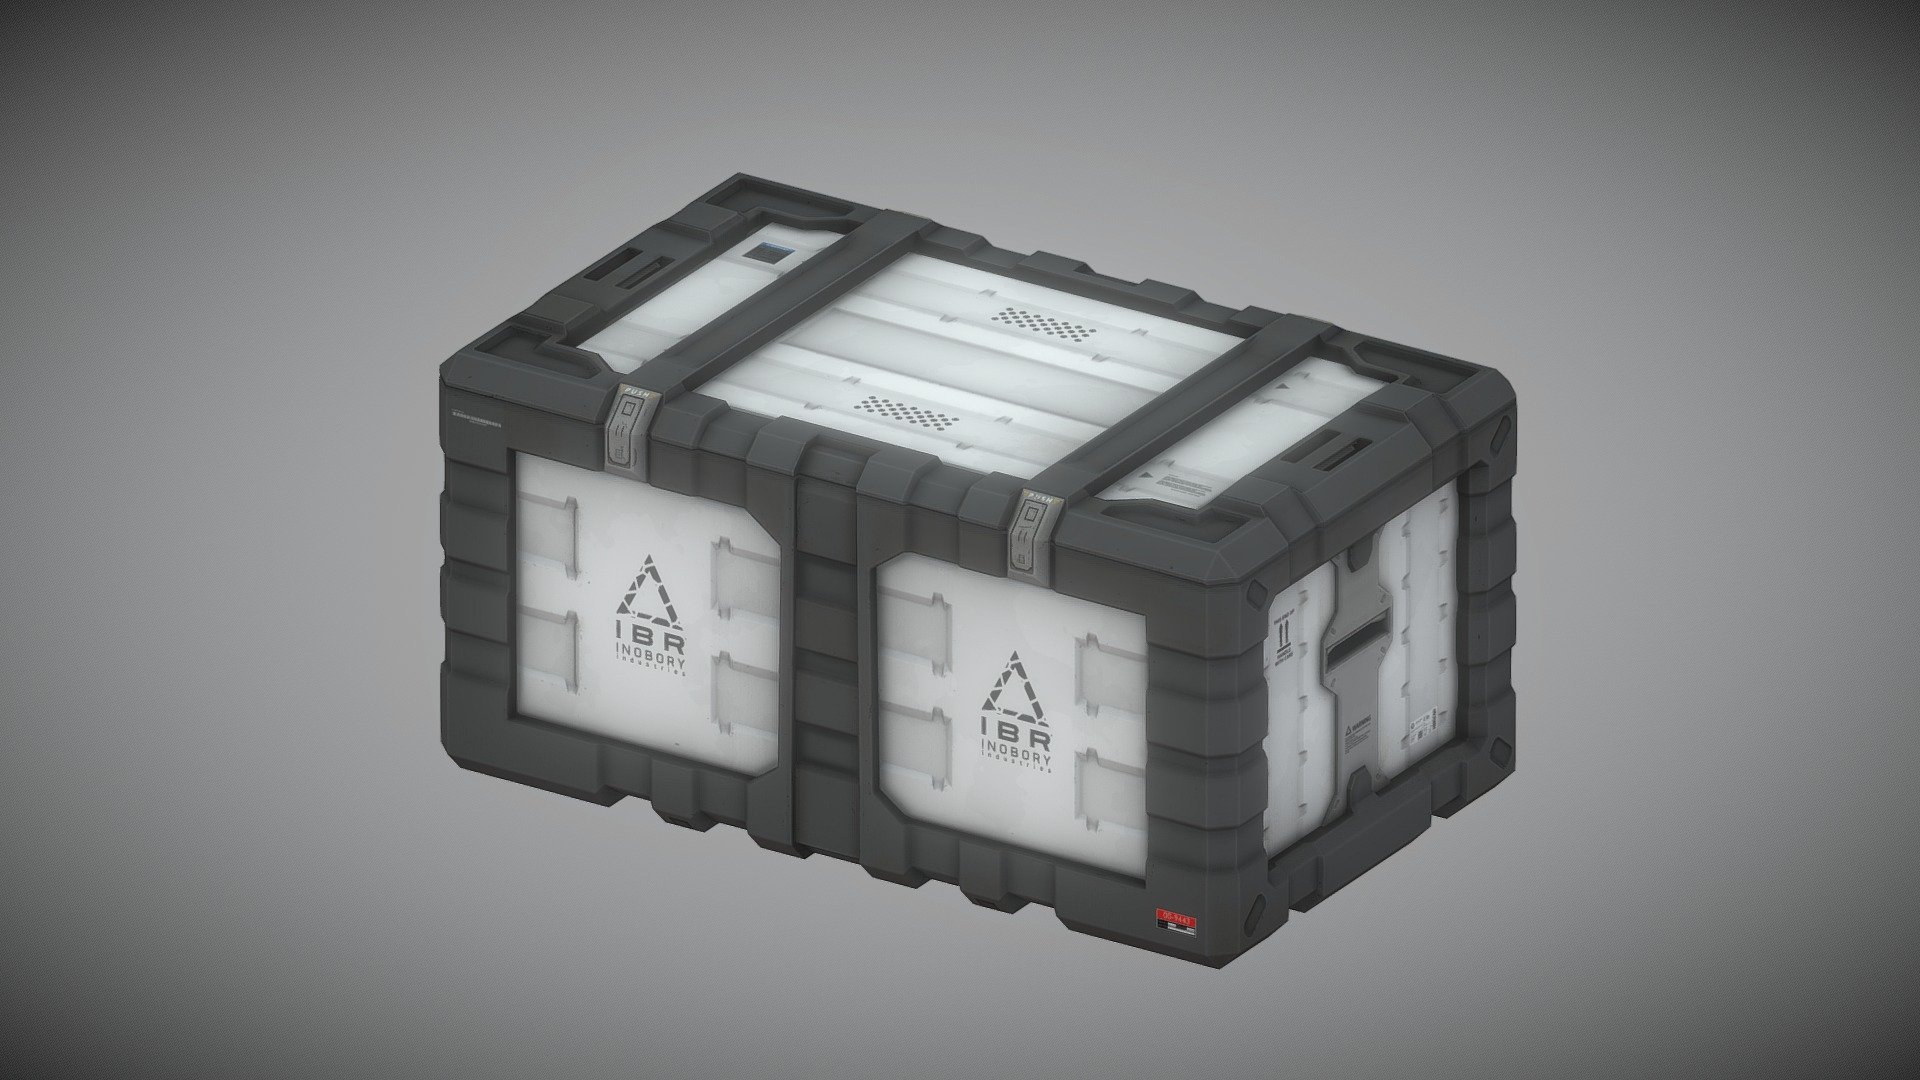 Medium Crate AAA: Generic
Textures: 4096x4096, diffuse, normal, specular.

Part of the Sci-Fi Crates Pack AAA. Available on Asset Store.

About Sci-Fi Crates &amp;Boxex Pack AAA:

Complete kit of 11 crates and boxes (openable) for sci-fi level, science lab, cyberpunk or spaceship environment of AAA-quality.

Gameready lowpolies baked with love from cinematic highpolies. Each model contain textures: 4096x4096, diffuse, normal, specular. Concept design by of the top AAA artists. Production cost over $6,000. Make your own level design on Unity competitive to Deus Ex: Human Revolution, Deus Ex: Mankind Divided, Syndicate, Mass Effect, Cyberpunk 2077,  Star Citizen and Horizon Zero Dawn benchmarks!

Preview for each of the items attached via Sketchfab (rotate, zoom, enjoy).

（╹◡╹） - Medium Crate AAA (generic) - Buy Royalty Free 3D model by blackcloudstudios 3d model